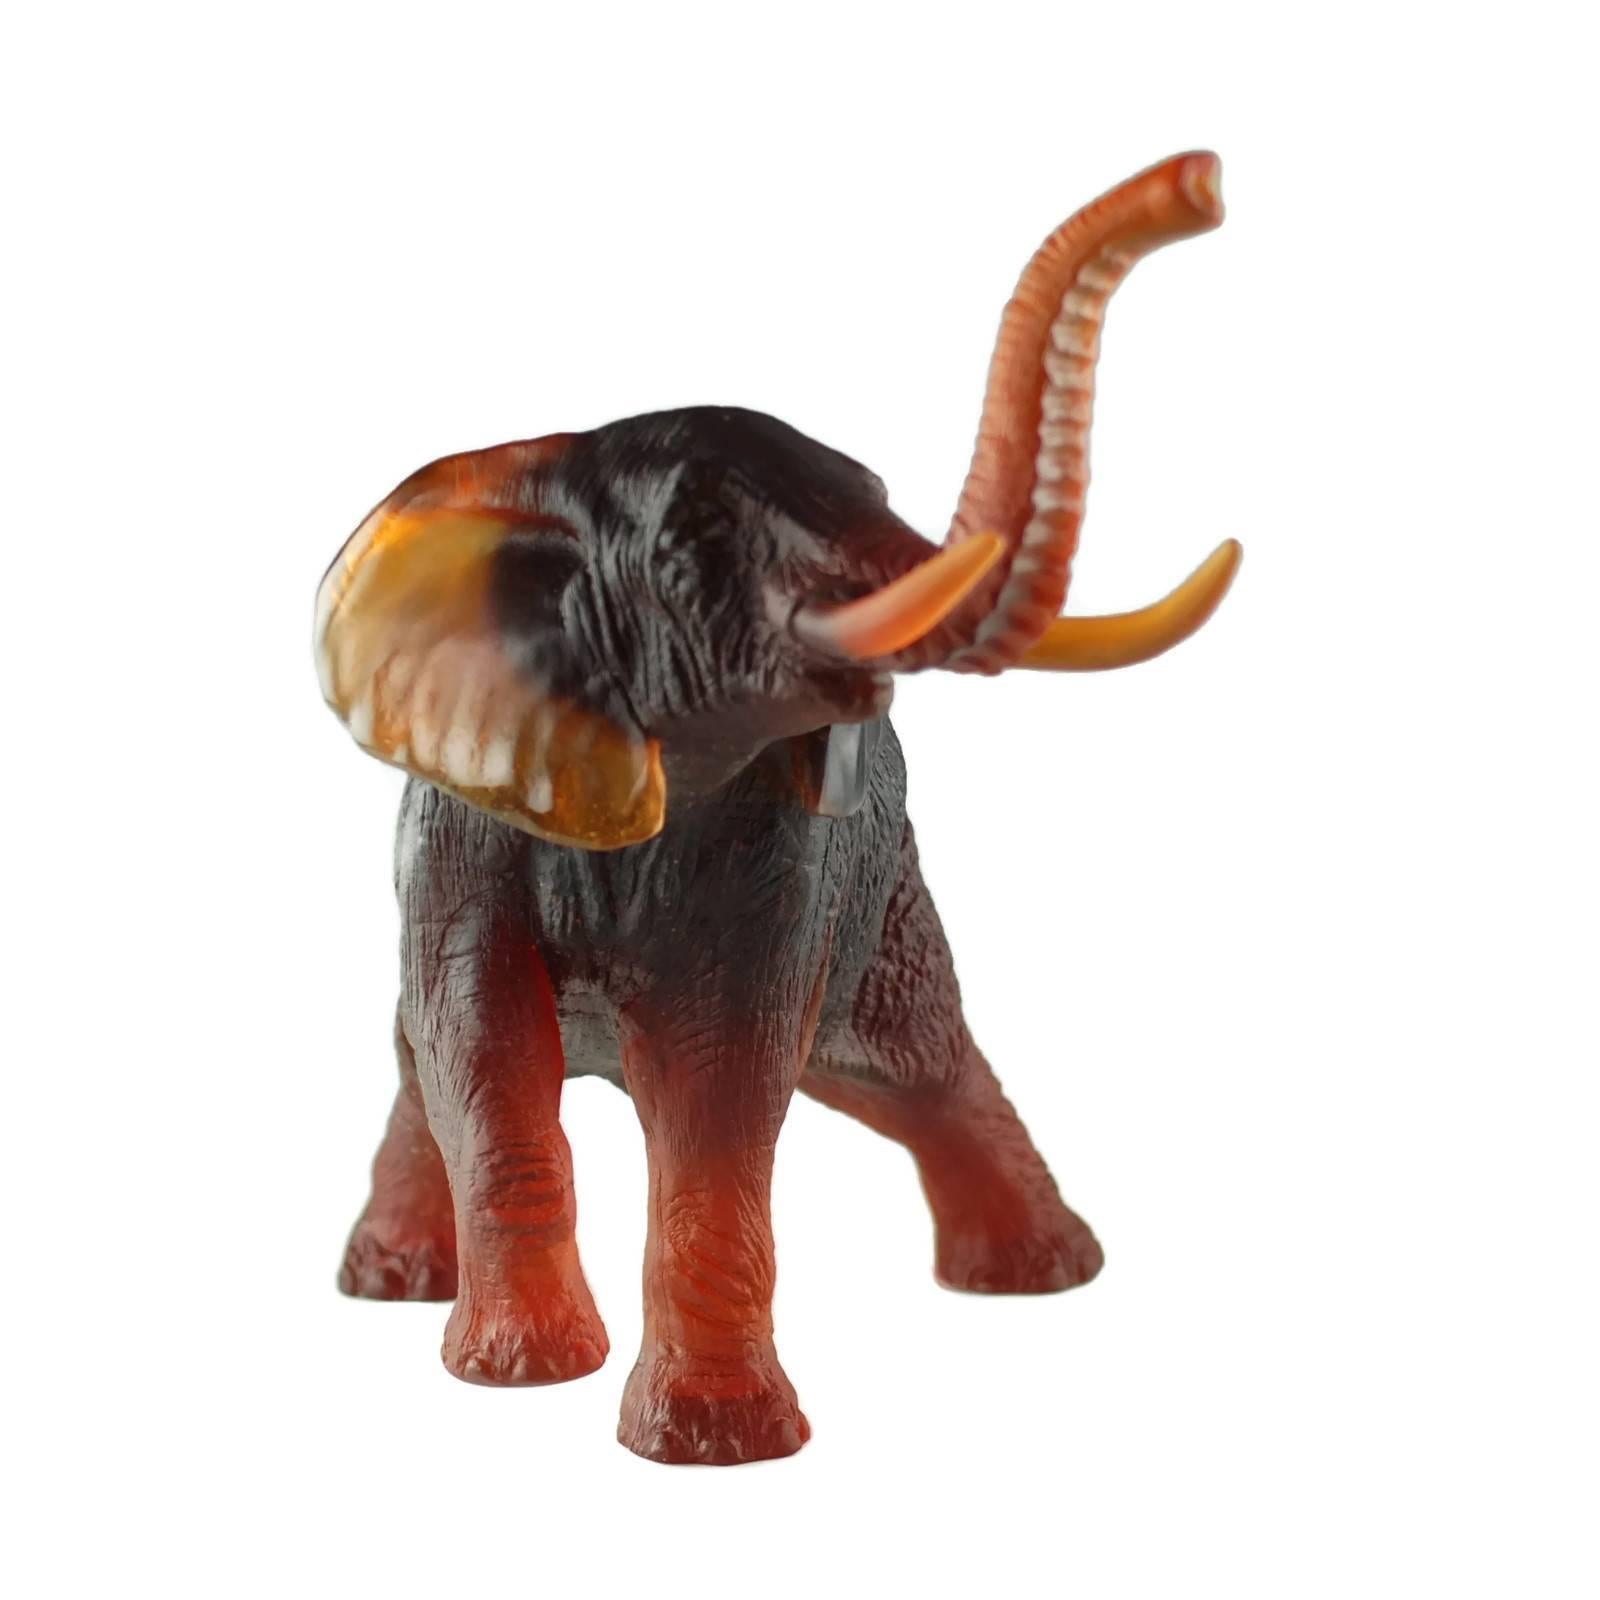 This large figural elephant was designed by sculptor Jean-Francois Leroy for Daum France. The piece is composed of amber pâte de verre glass and depicts an African elephant standing on three legs with trunk raised and mouth open as if in